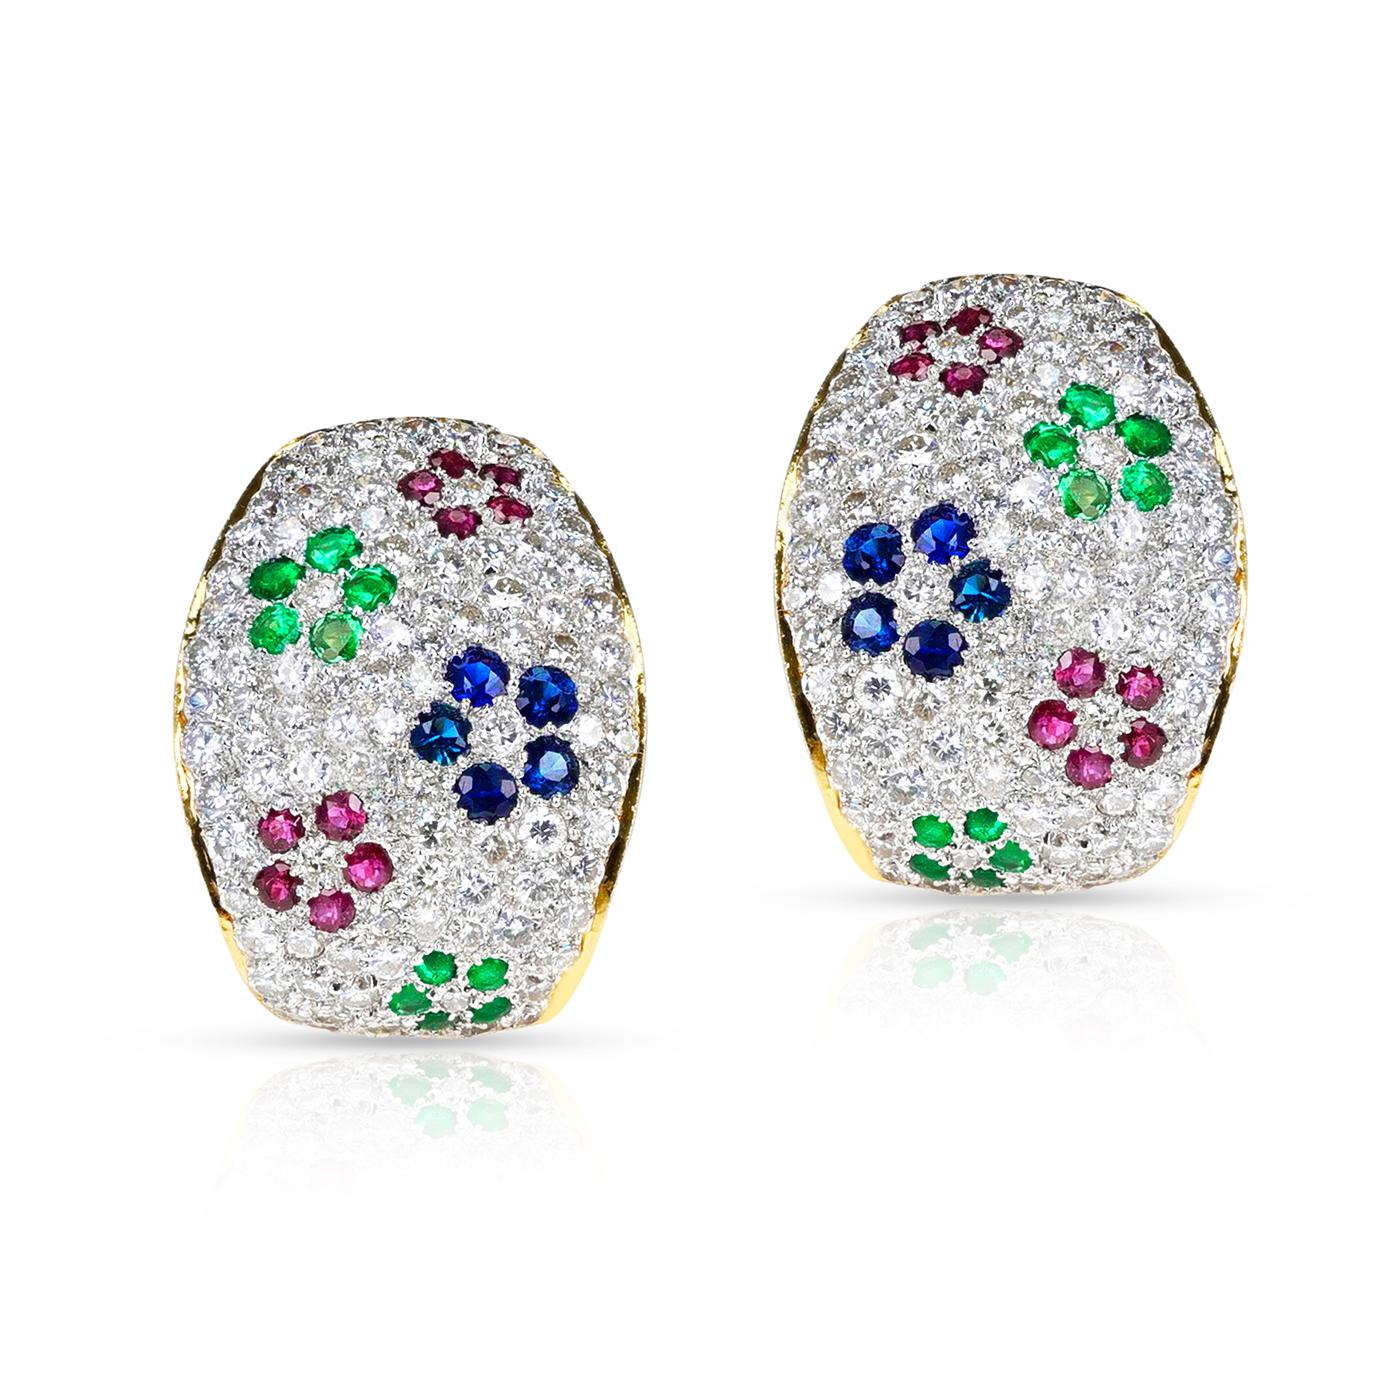 Women's or Men's Diamond, Emerald, Ruby and Sapphire Floral Design Earrings, 18k